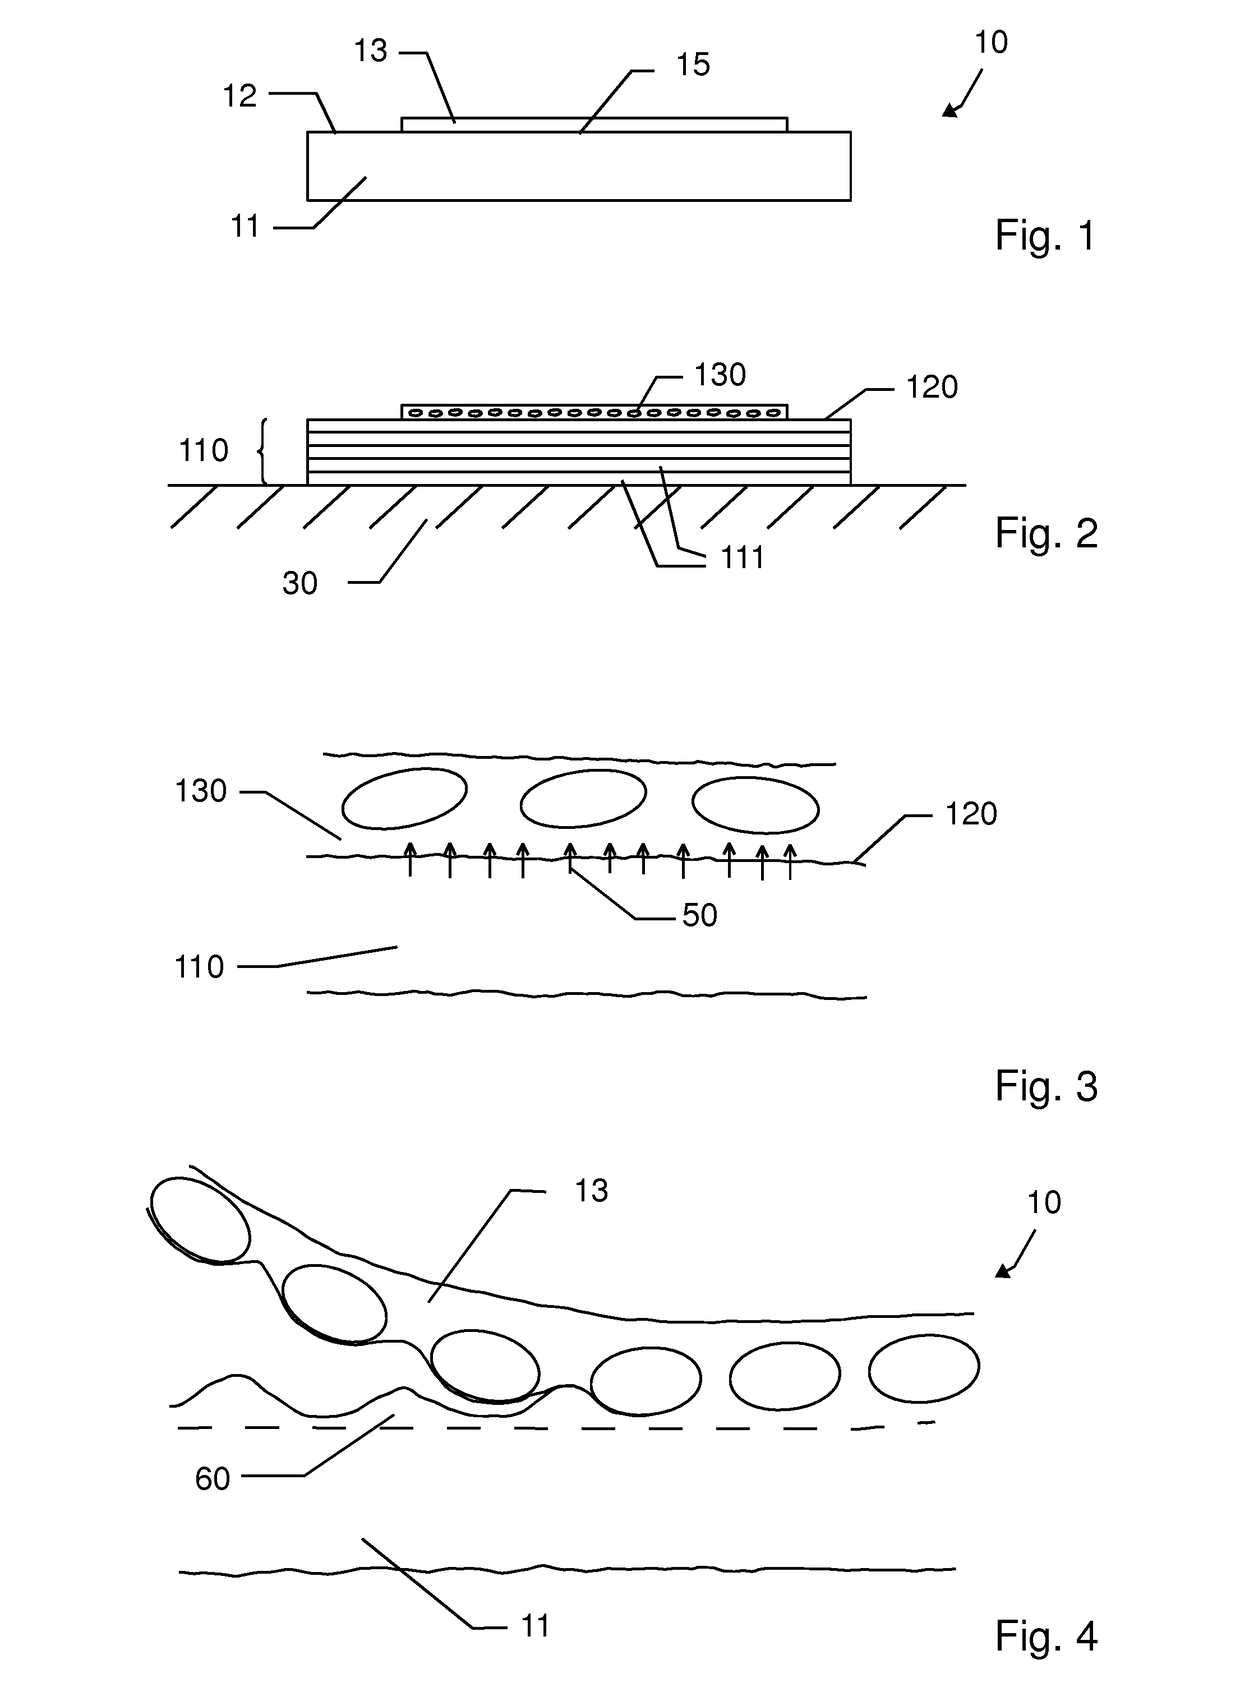 Pre-polymerized thermosetting composite part and methods for making such a part